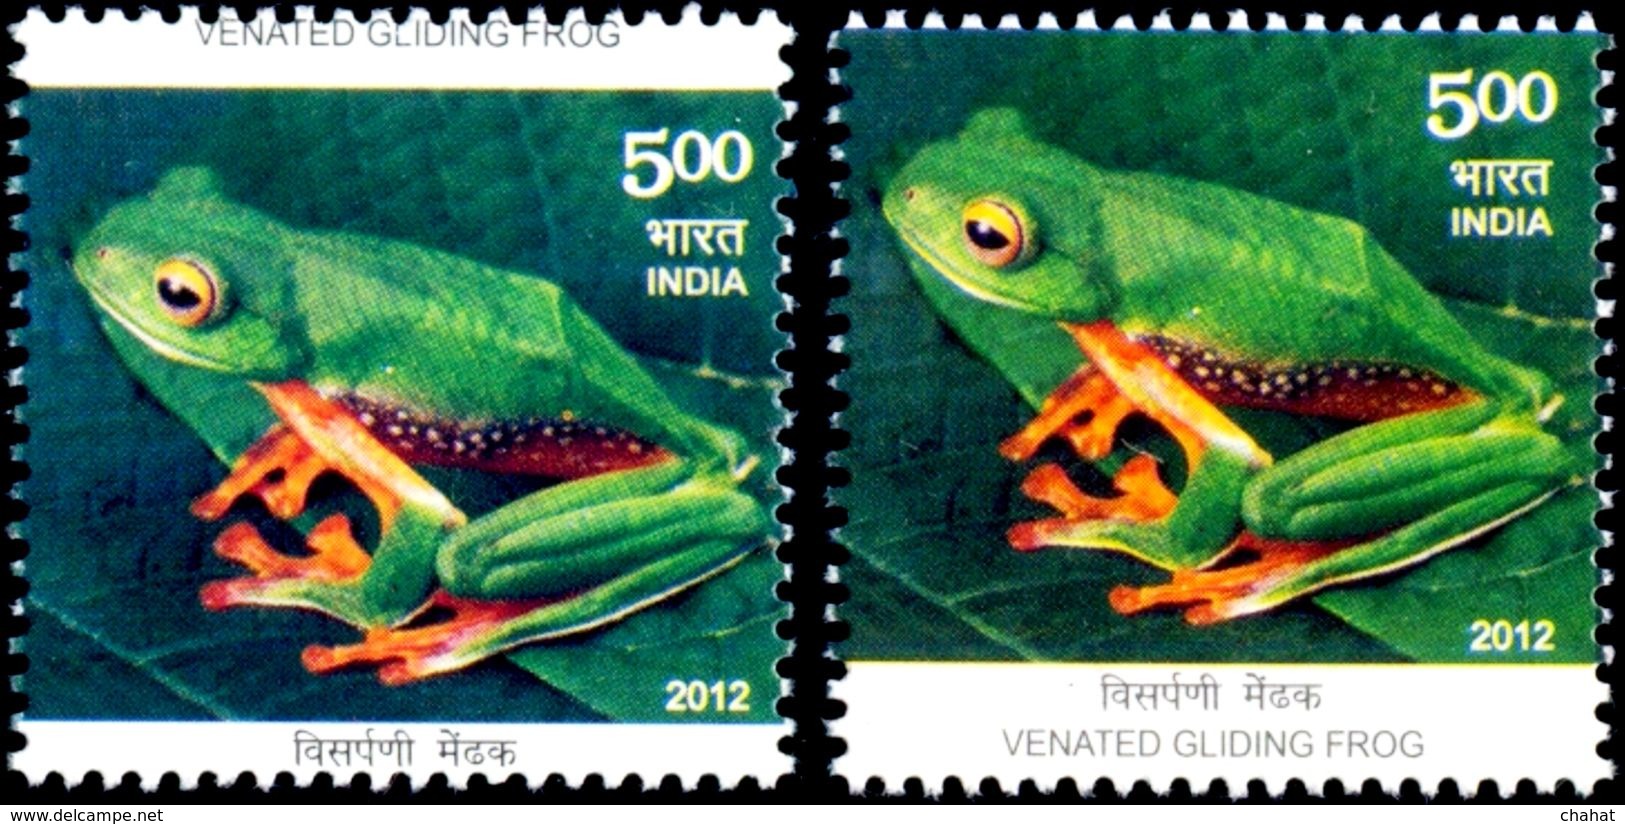 FROGS-MASSIVE ERROR-VENATED GLIDING FROGS-INDIA-2012-MNH-TP-264 - Errors, Freaks & Oddities (EFO)